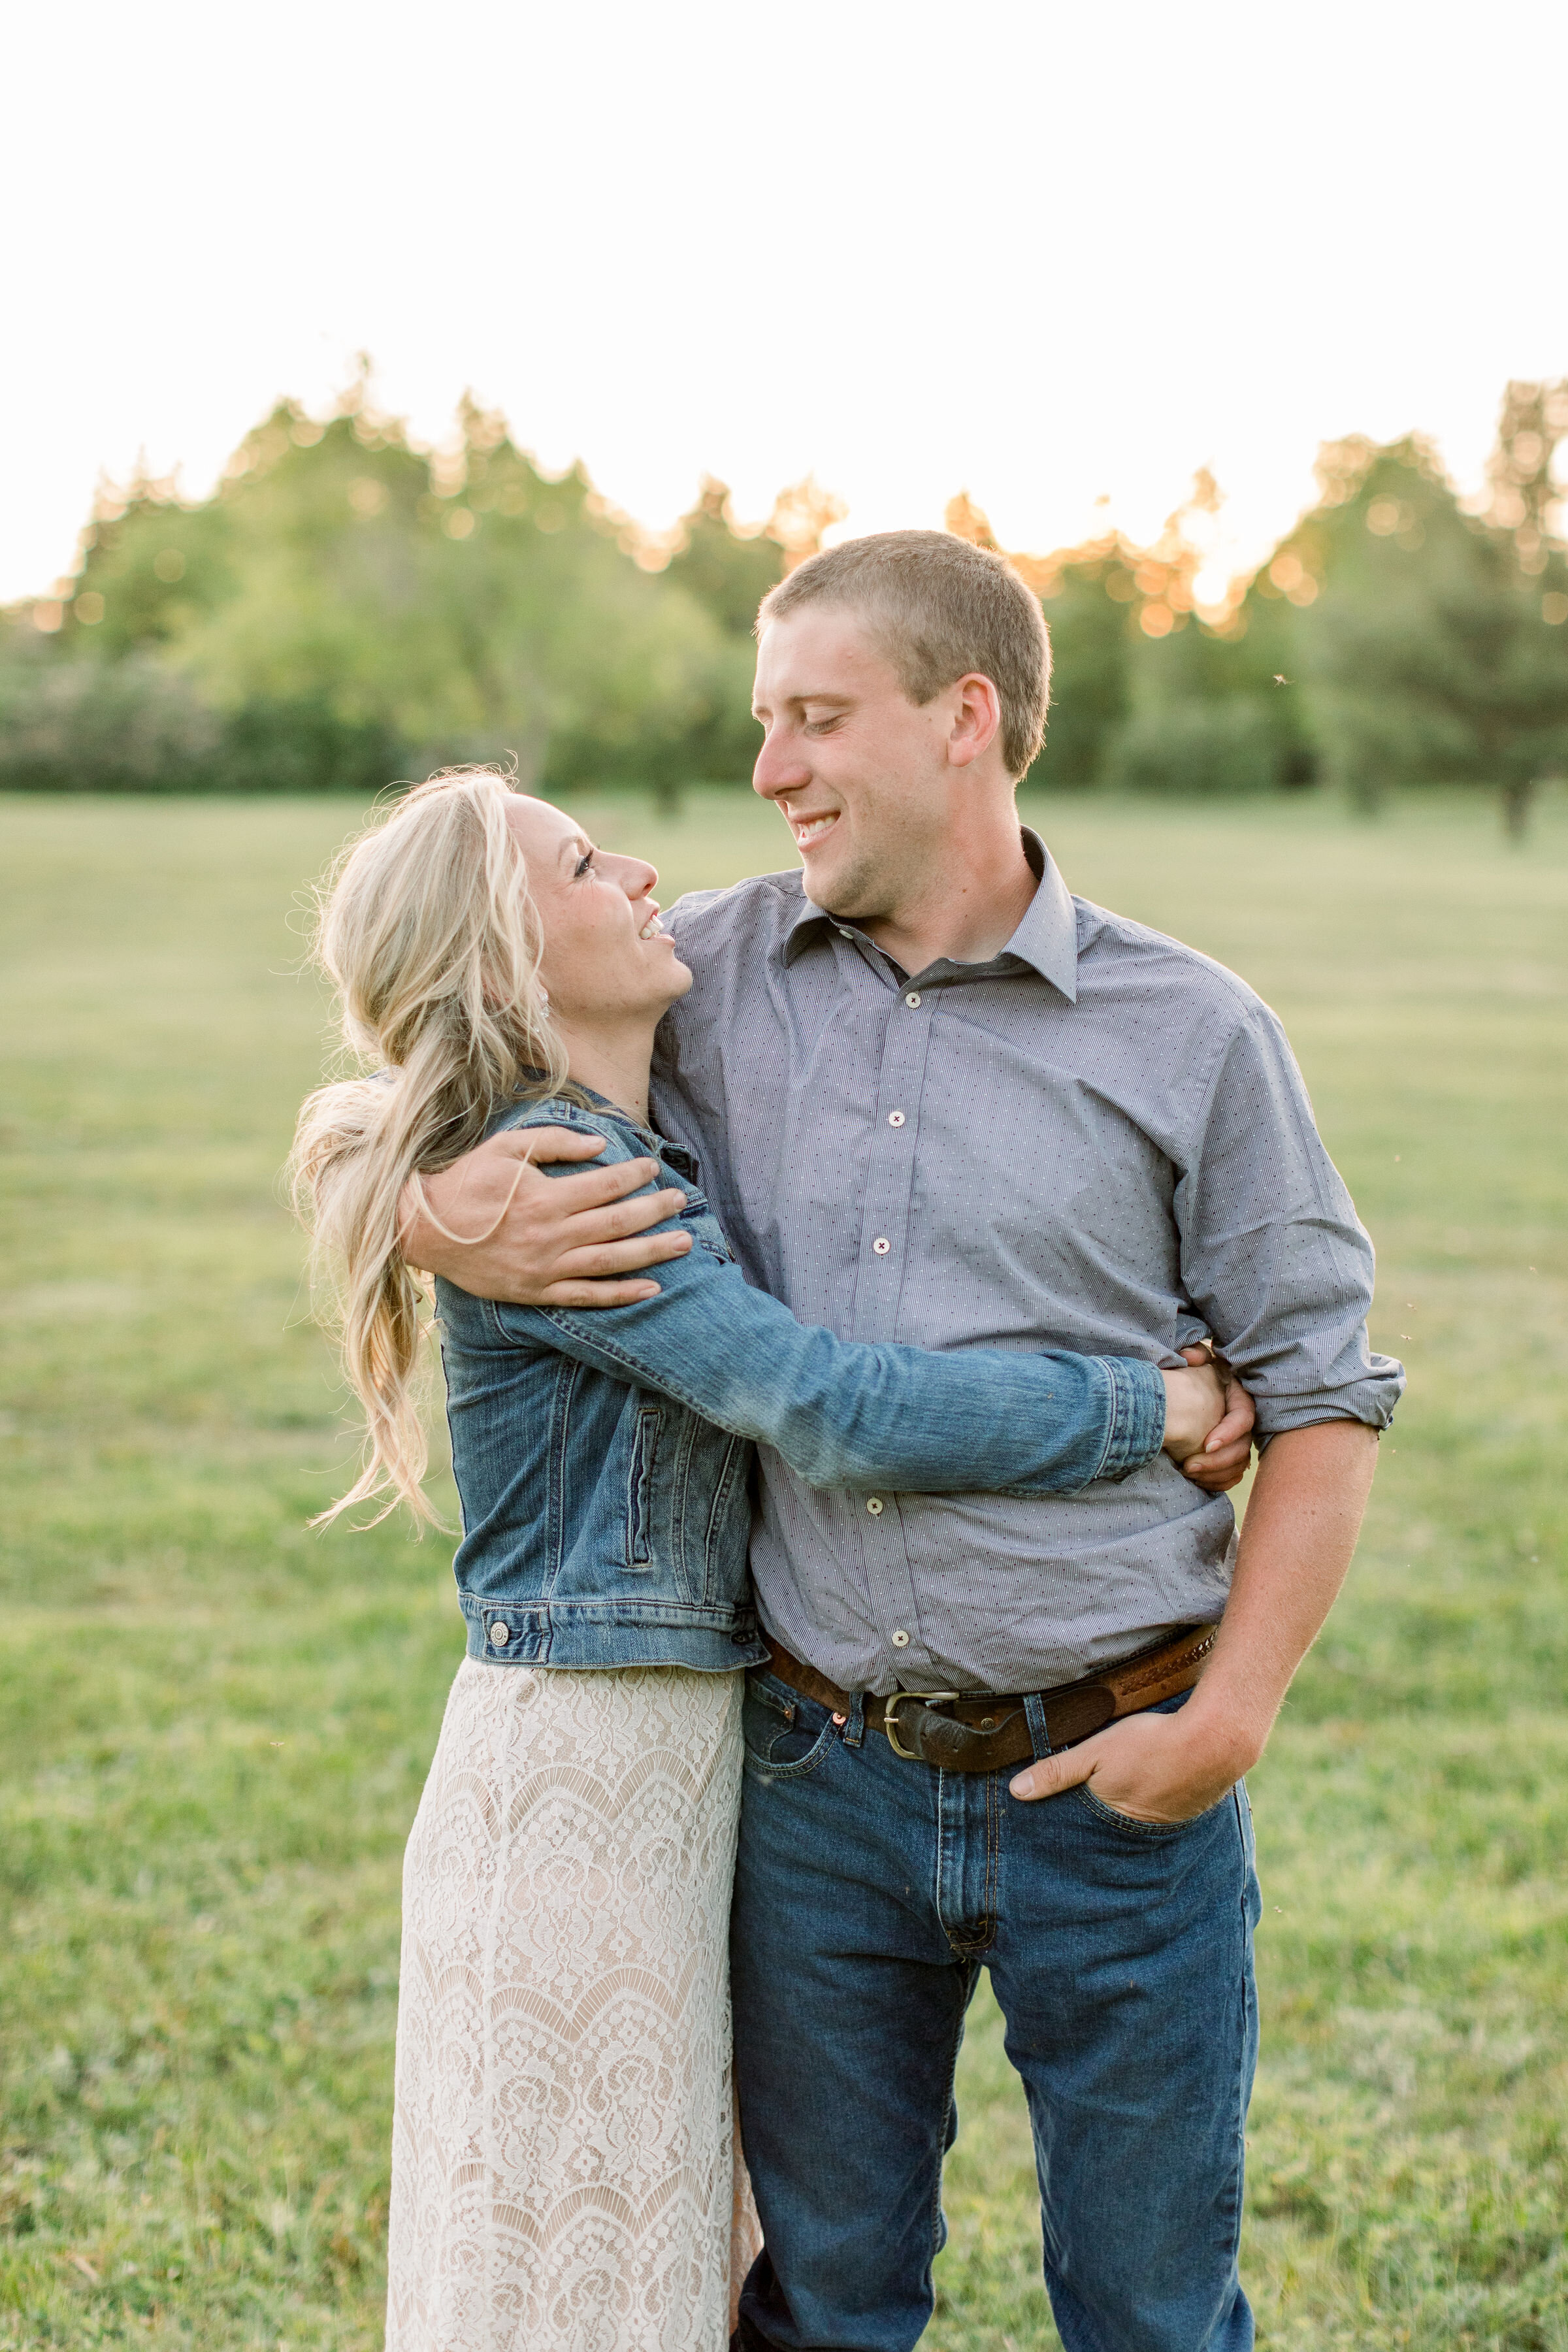  Posed in a grassy field in Ontario, Canada, Chelsea Mason Photography captures this engaged couple wrapping their arms around one another and smiling. man wrapping arms around fiancé and smiling down at her engagement outfit inspiration #ChelseaMaso